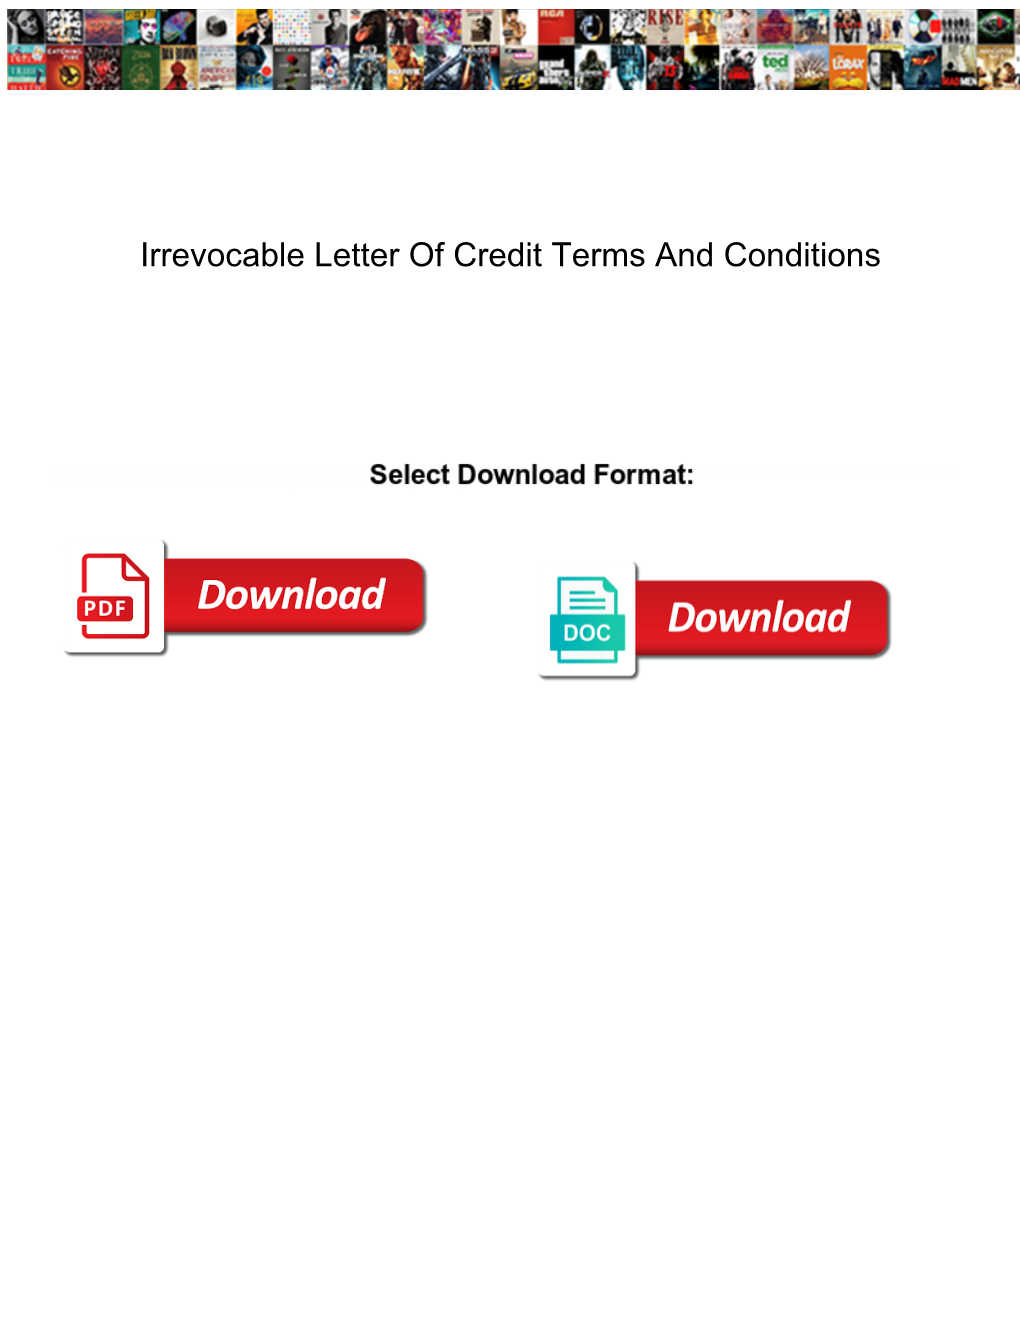 Irrevocable Letter of Credit Terms and Conditions